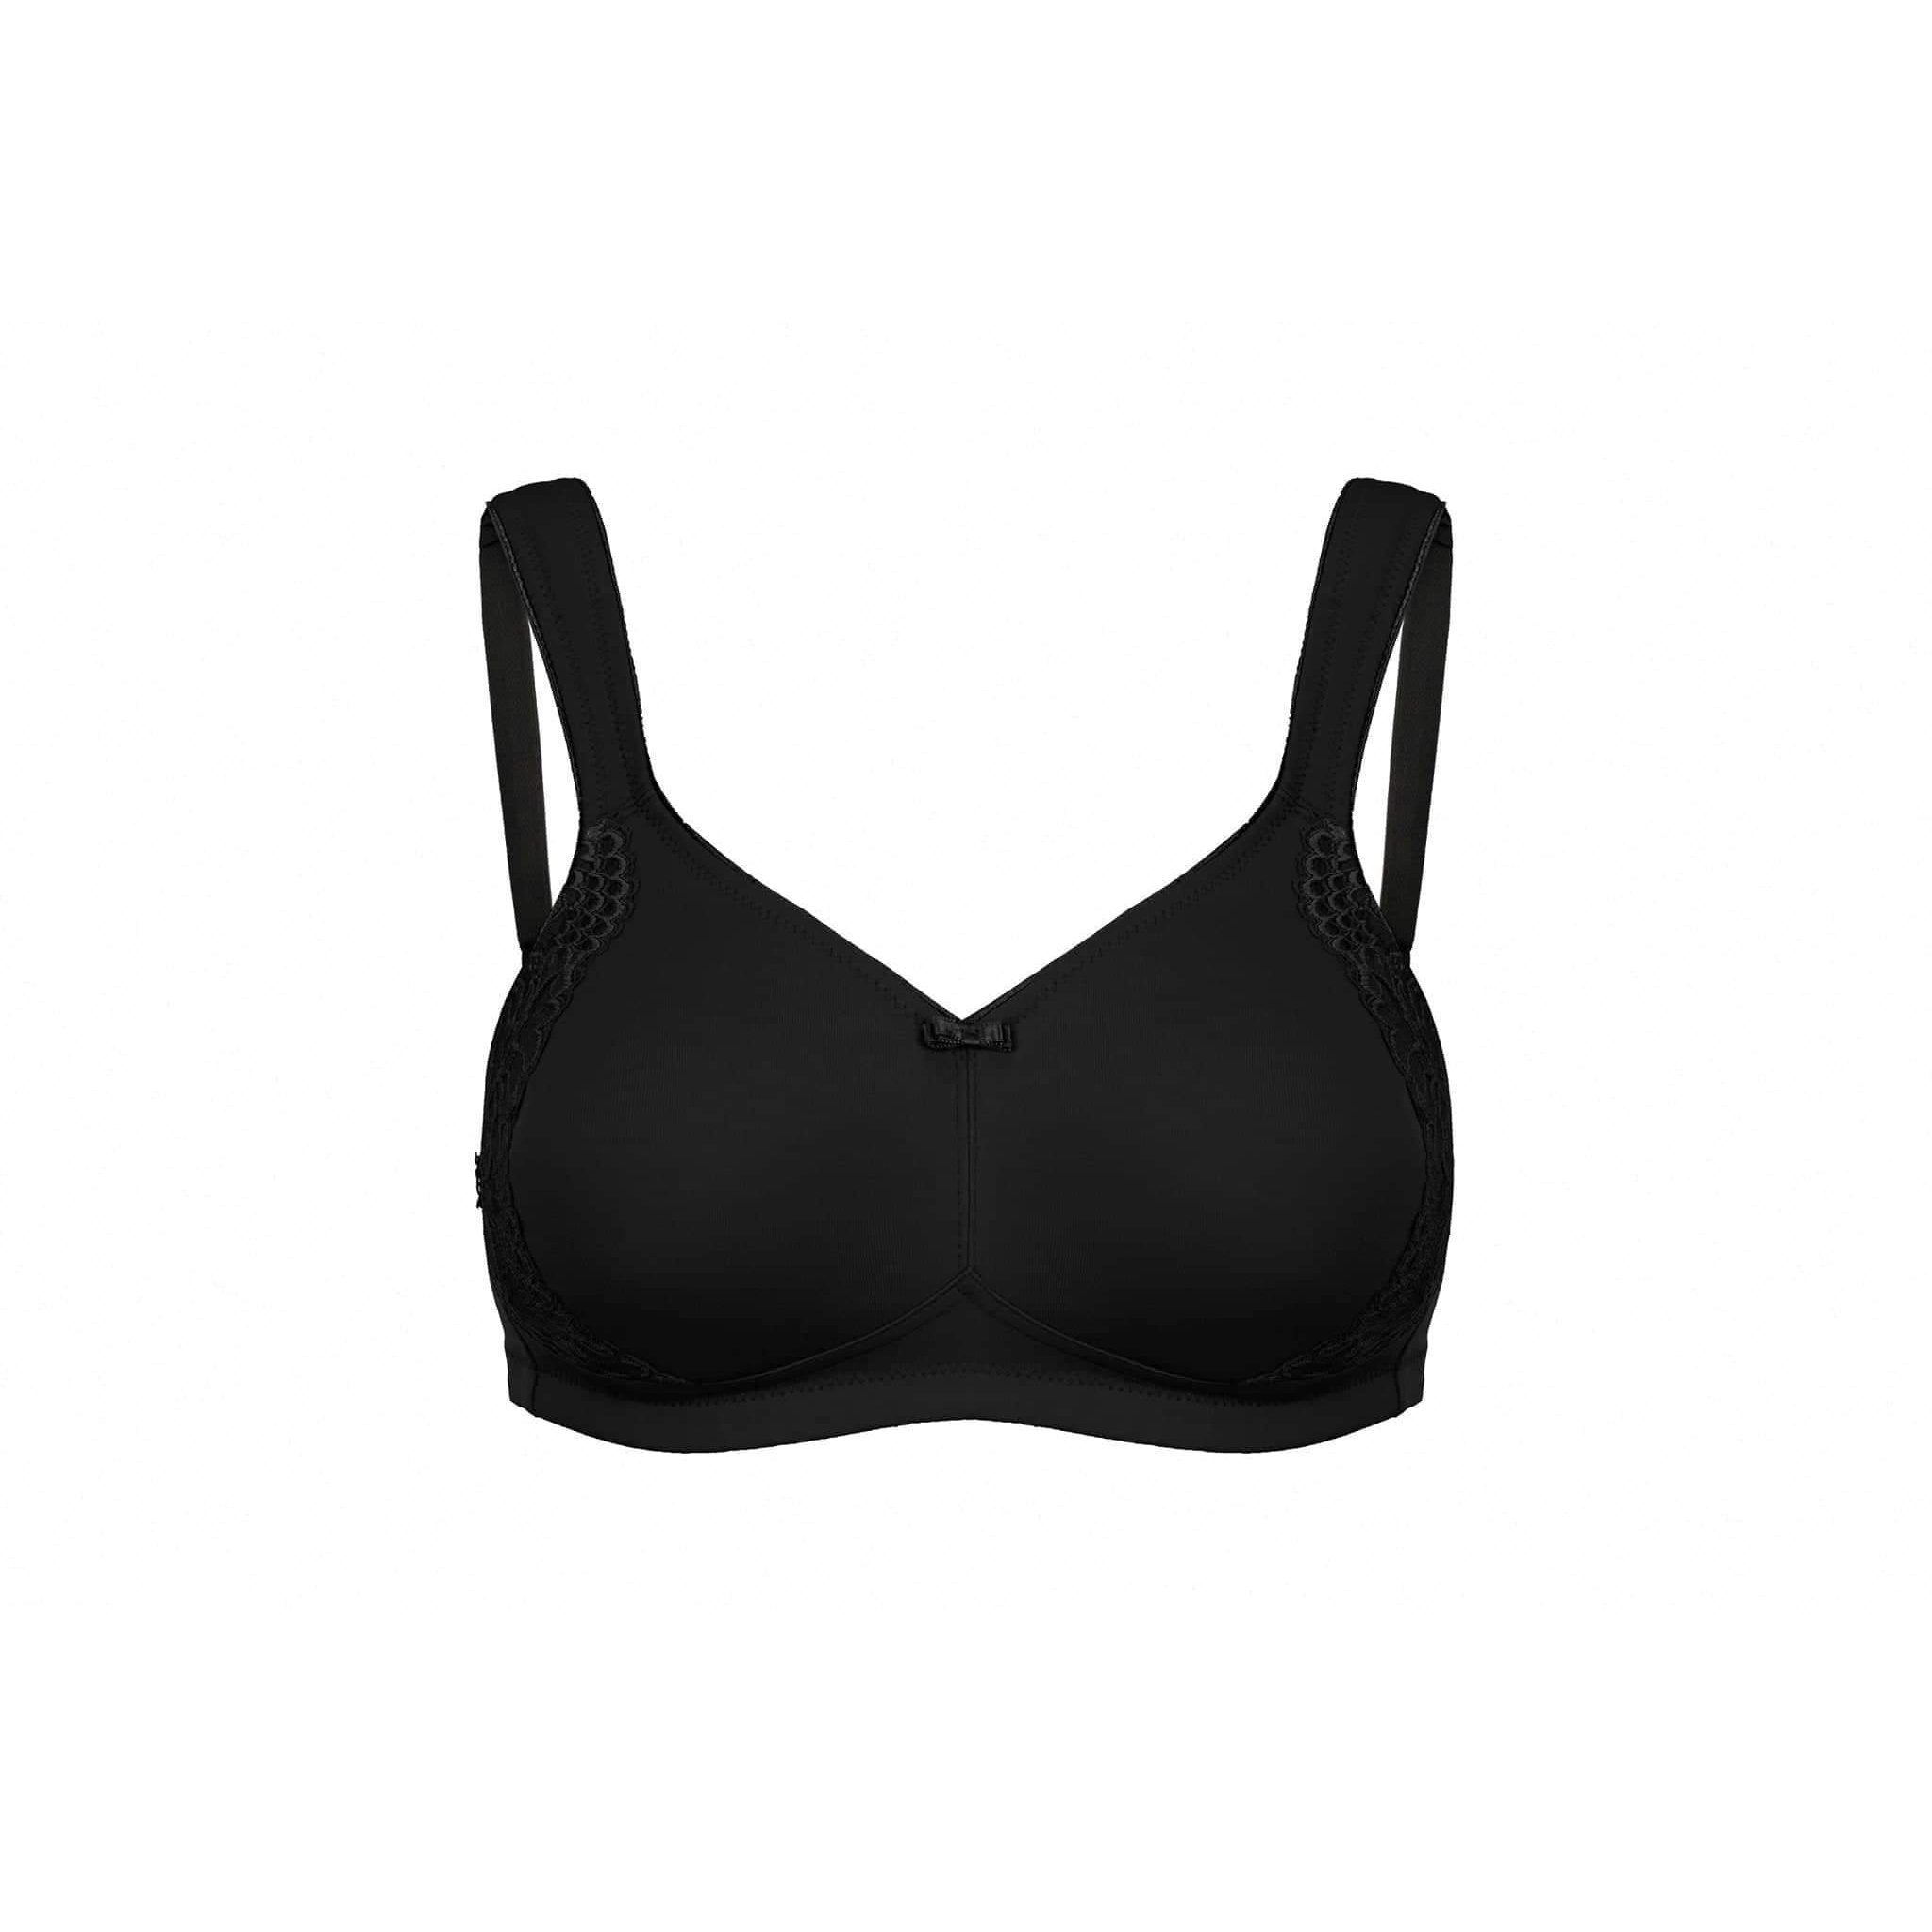 Susa London - Wirefree Bra  Available at Illusions Lingerie